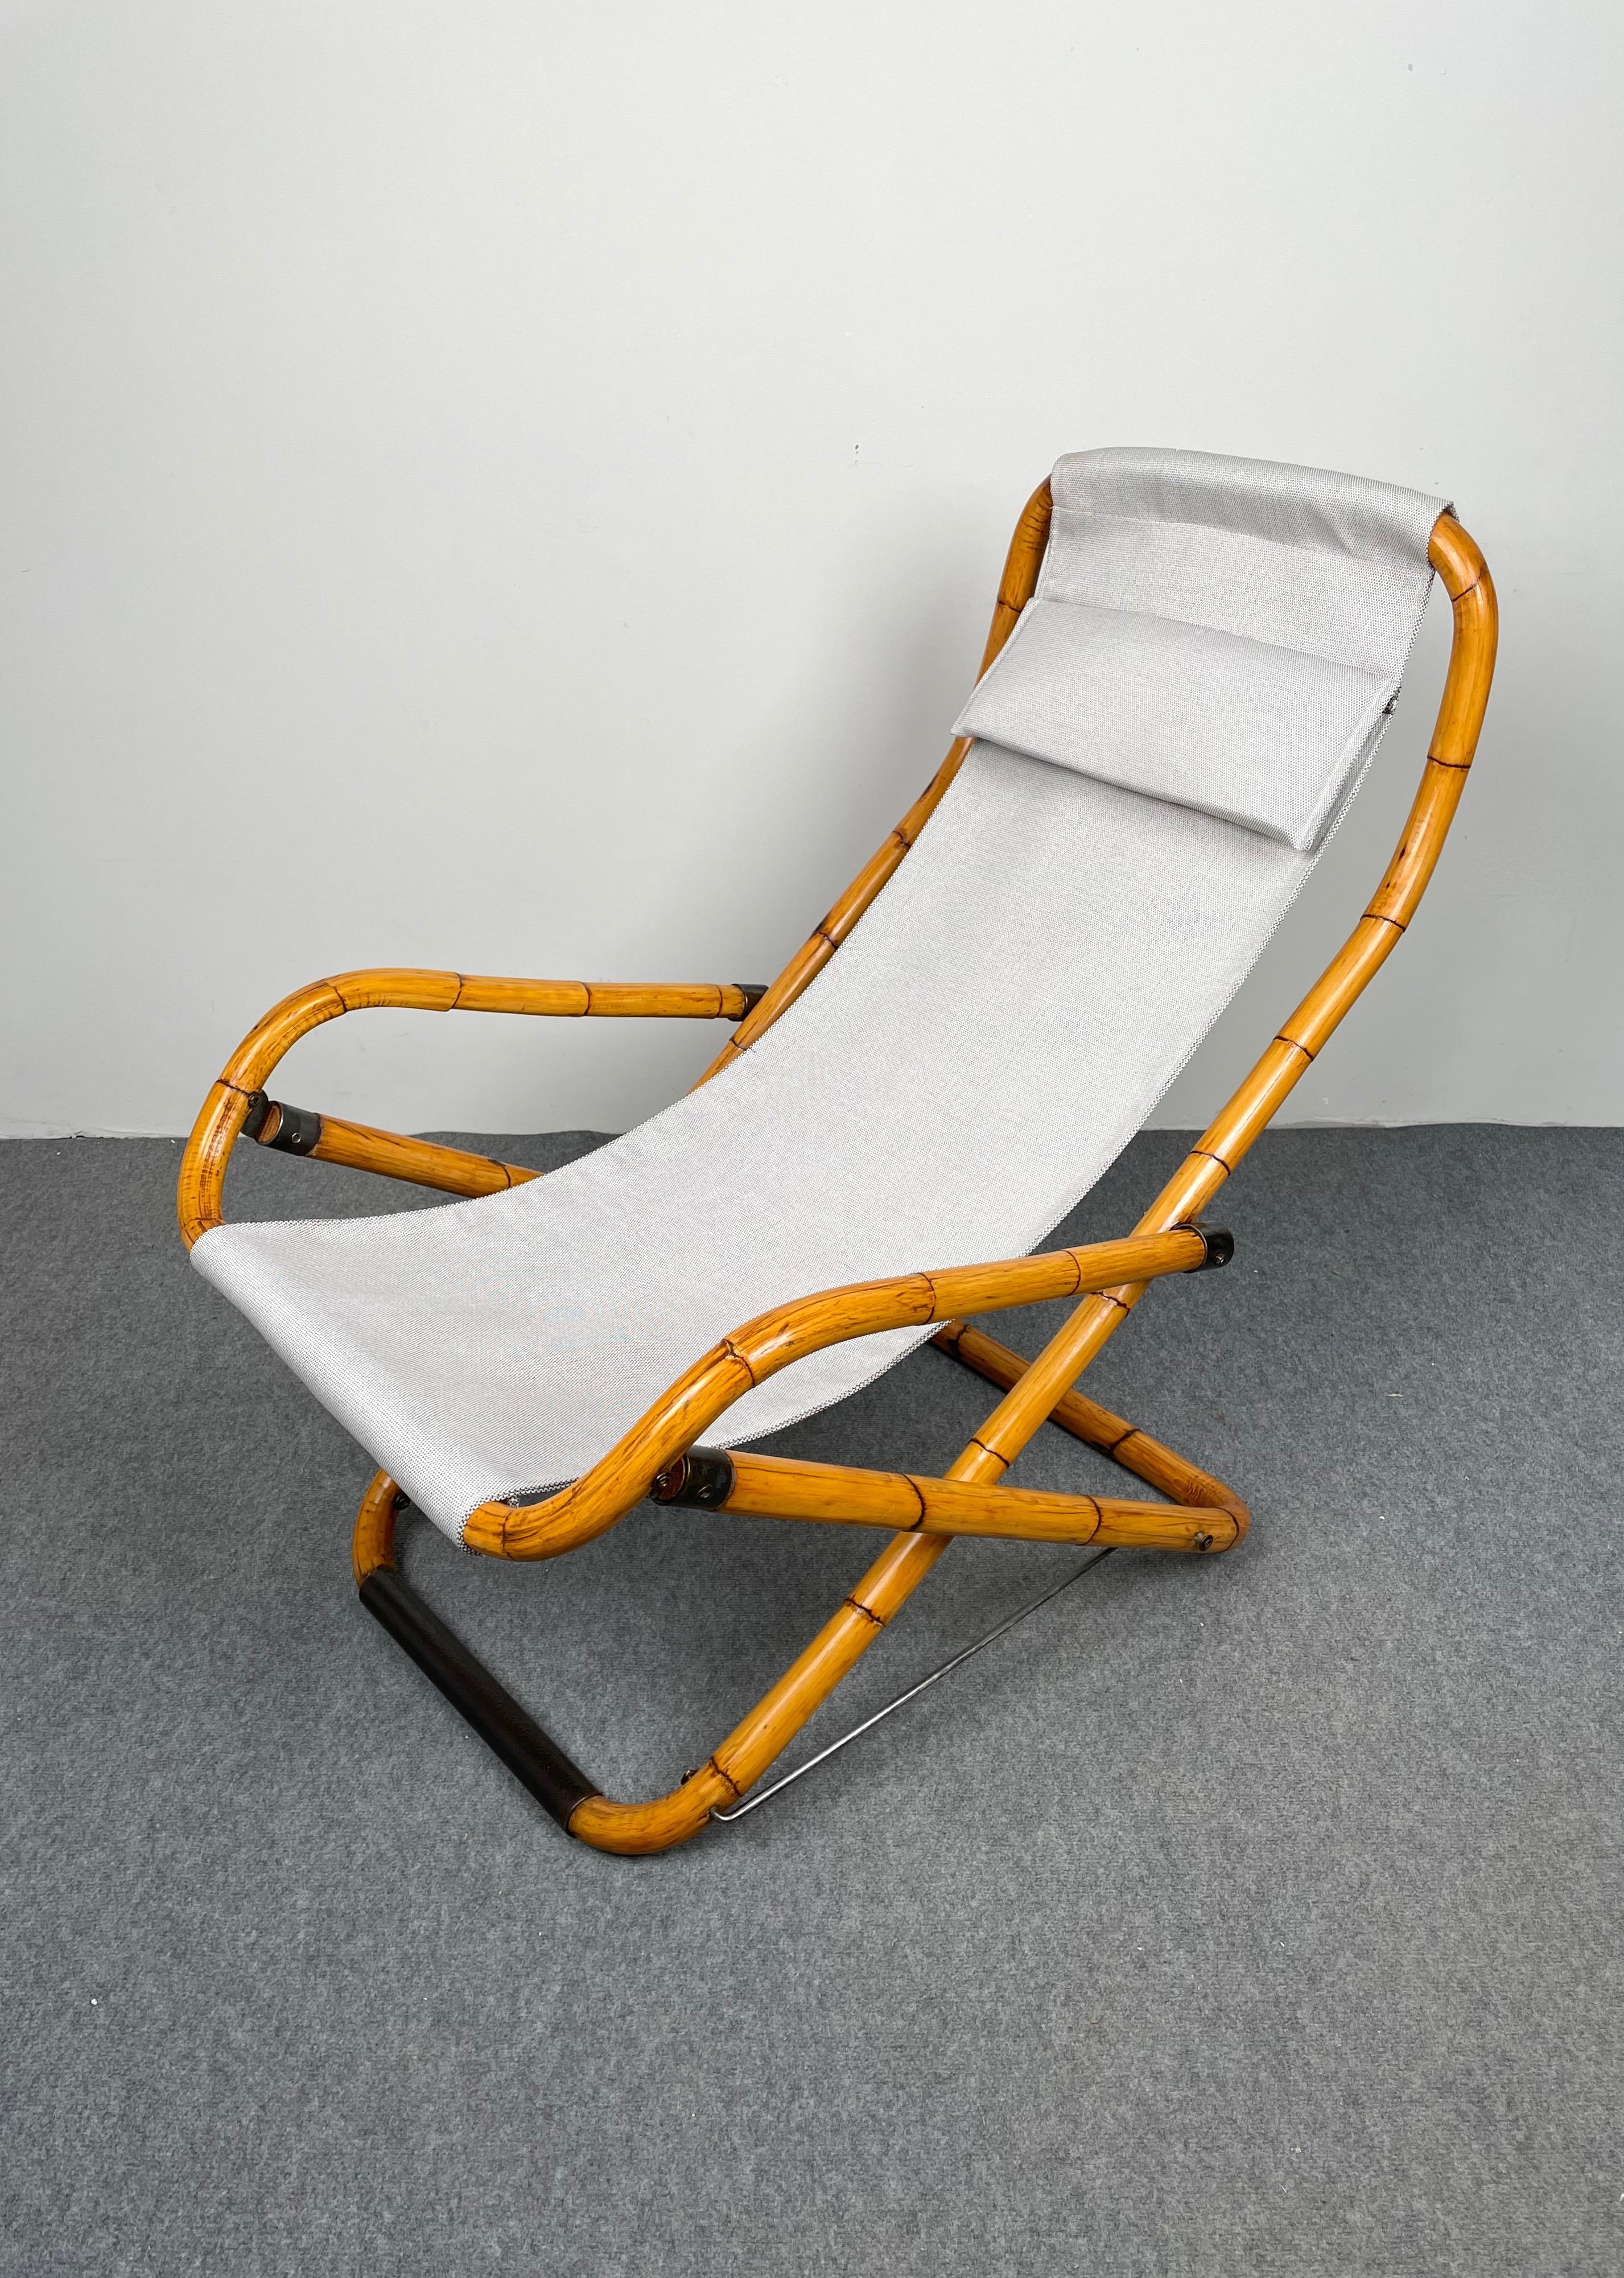 Pair of Bamboo, Iron and Fabric Folding Lounge Deck Chair, Italy, 1960s In Good Condition For Sale In Rome, IT